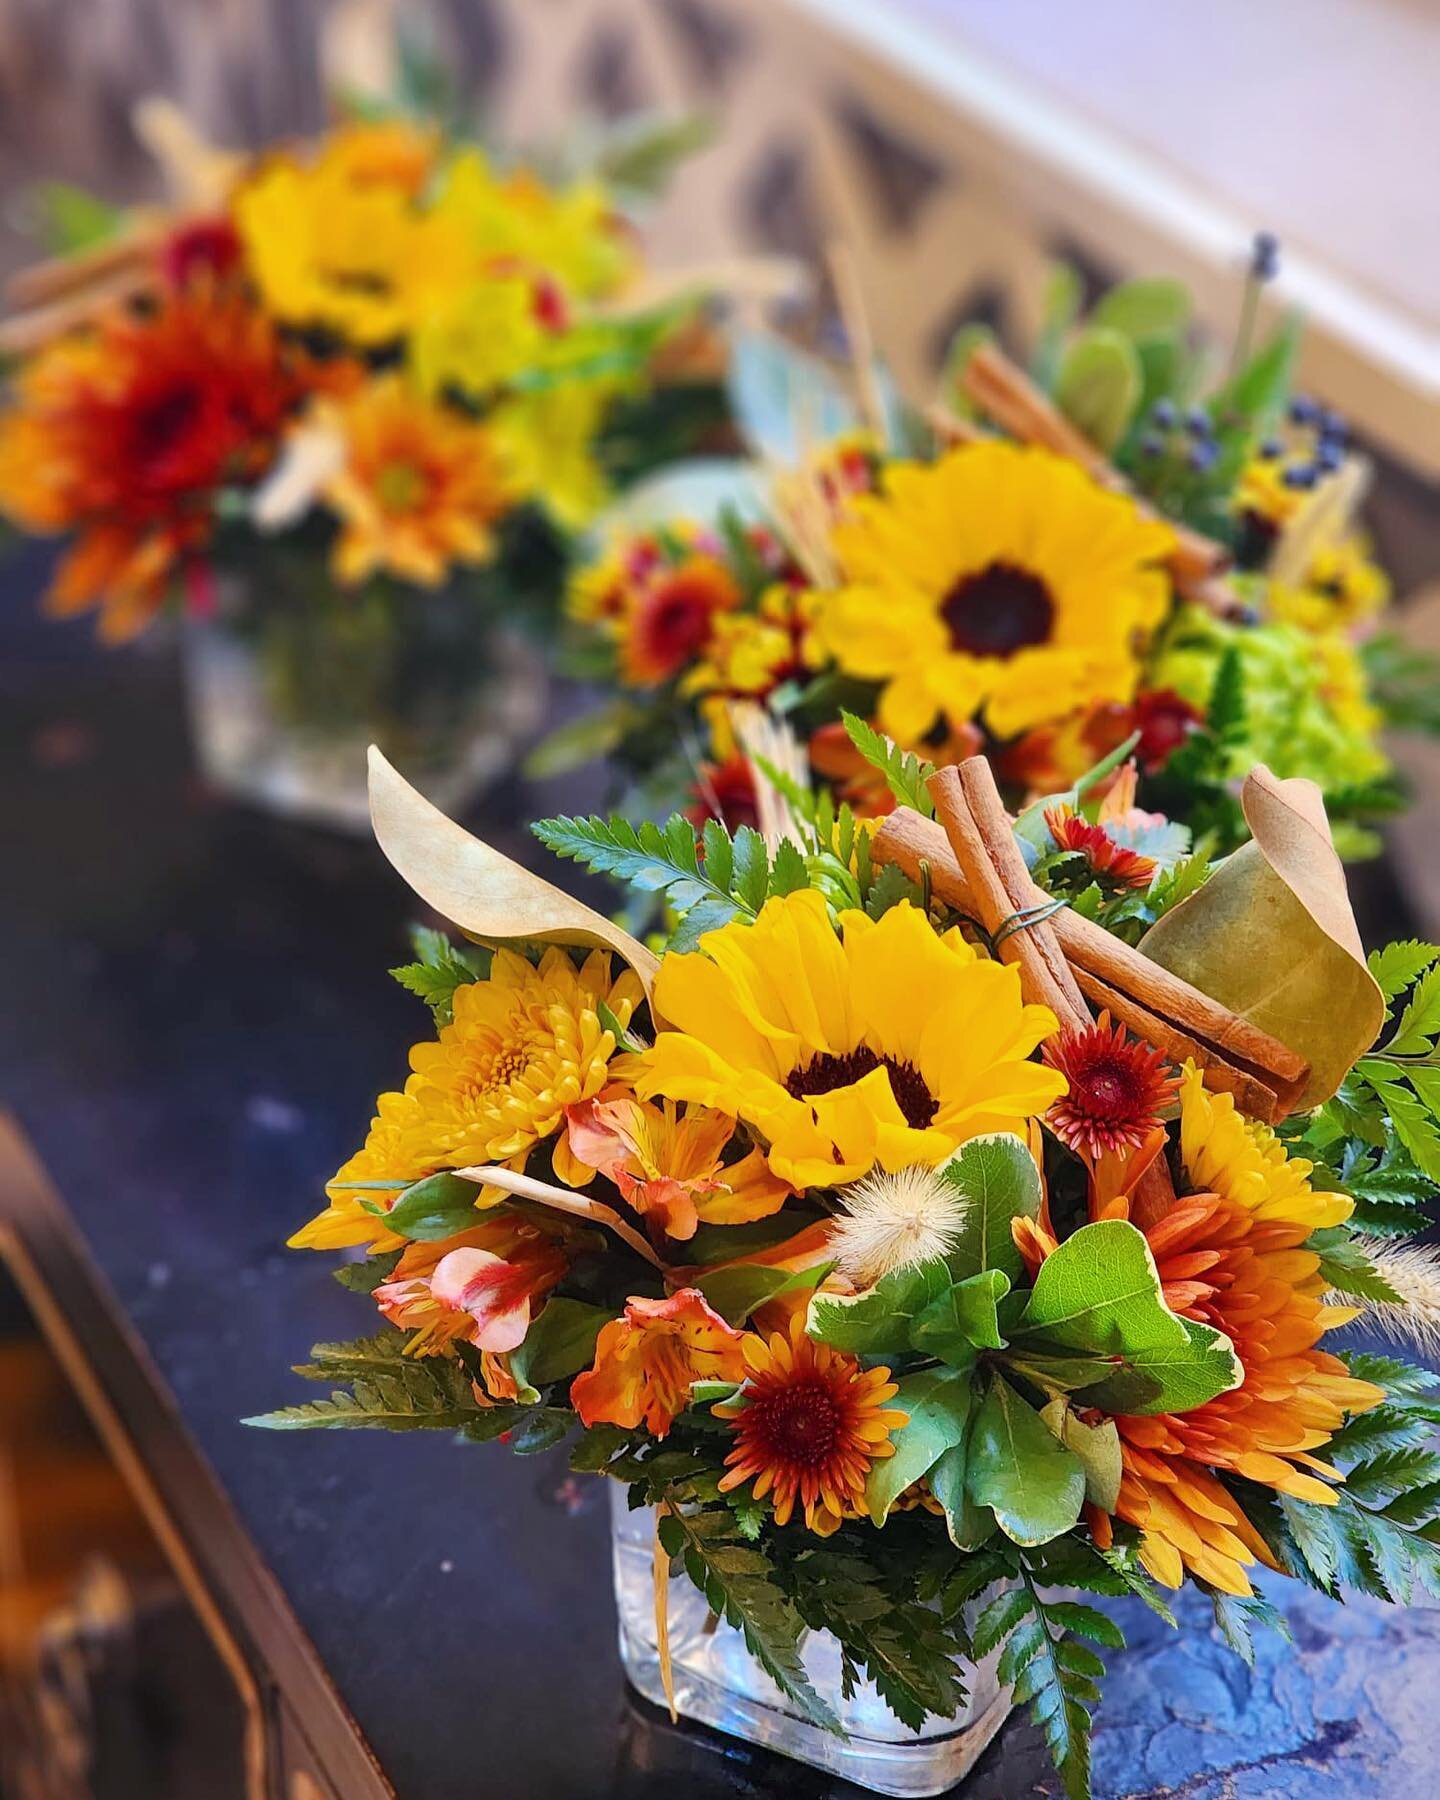 Turkey and Pies may be on your mind  as you prepare for Thursday - but don&rsquo;t forget the flowers! 💐 We&rsquo;re here to help make sure your table decor is as festive as your menu. 🦃🍁🥧 Give us a call to place your order!